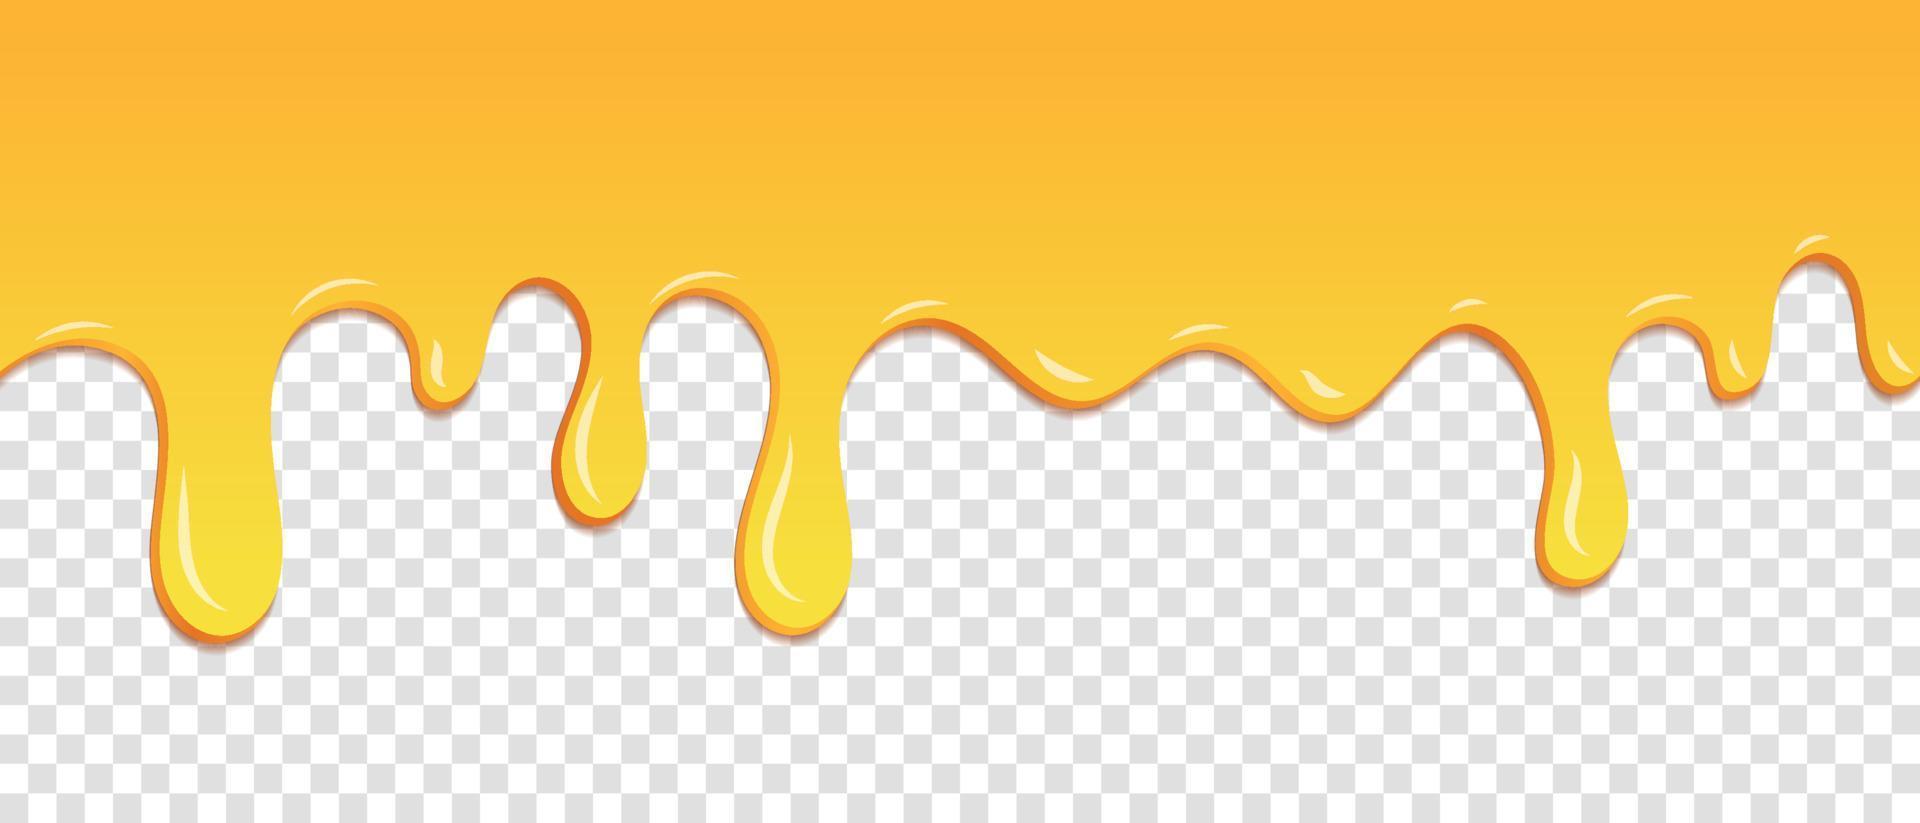 Seamless pattern of melted honey dripping. Dessert background with melted honey. Banner seamless pattern. Vector illustration